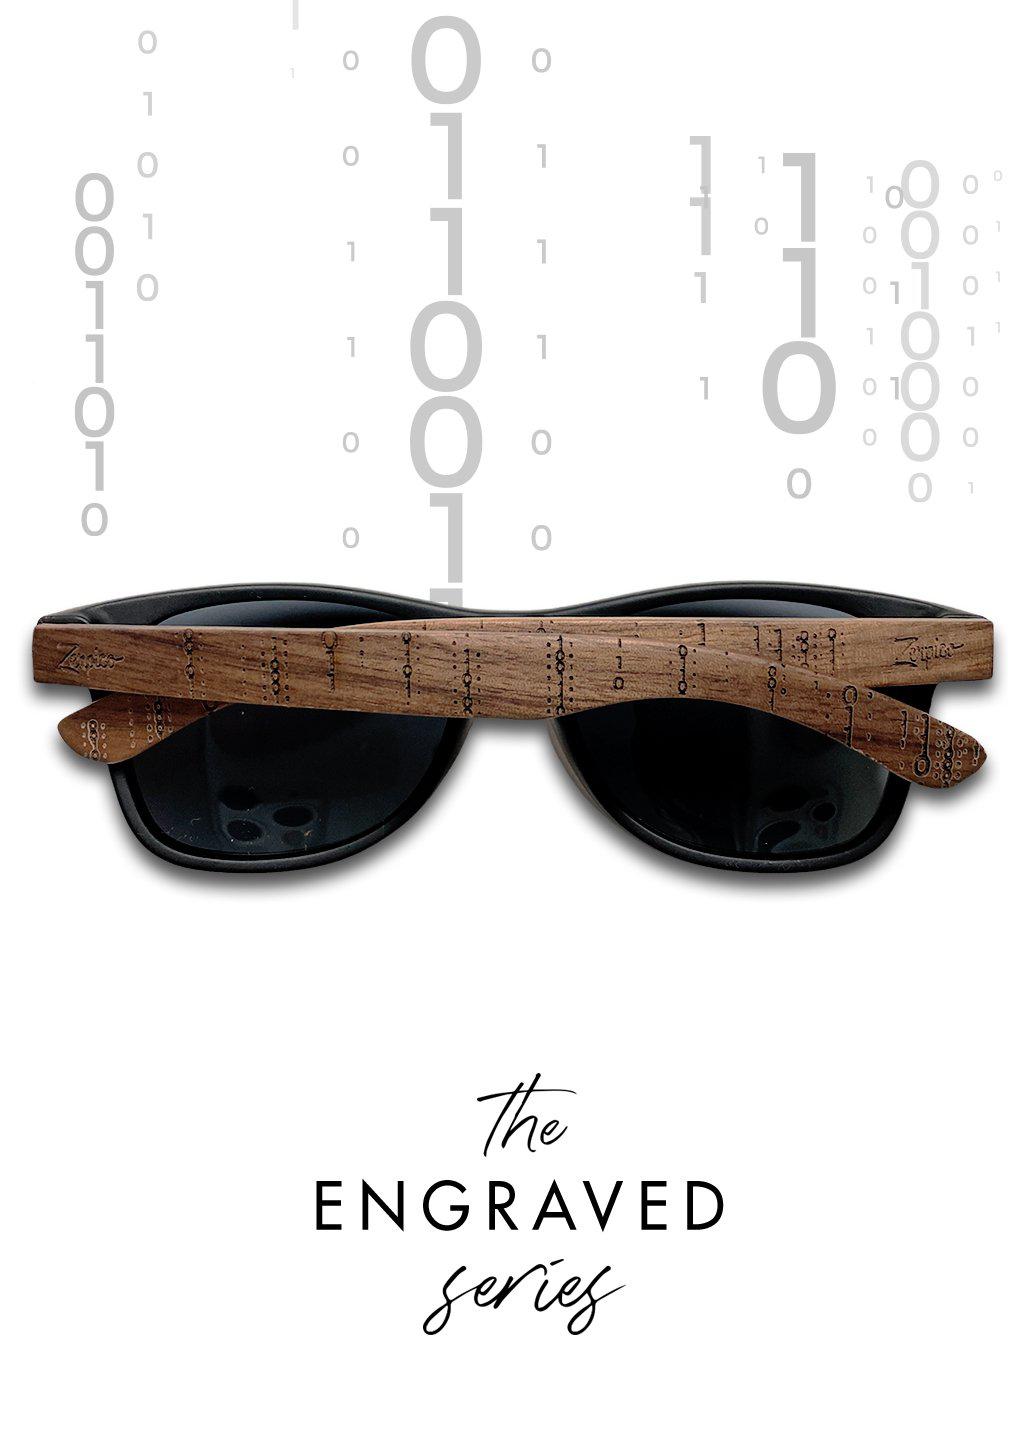 Engraved wooden sunglasses Inspired by the computers and the programing languages.